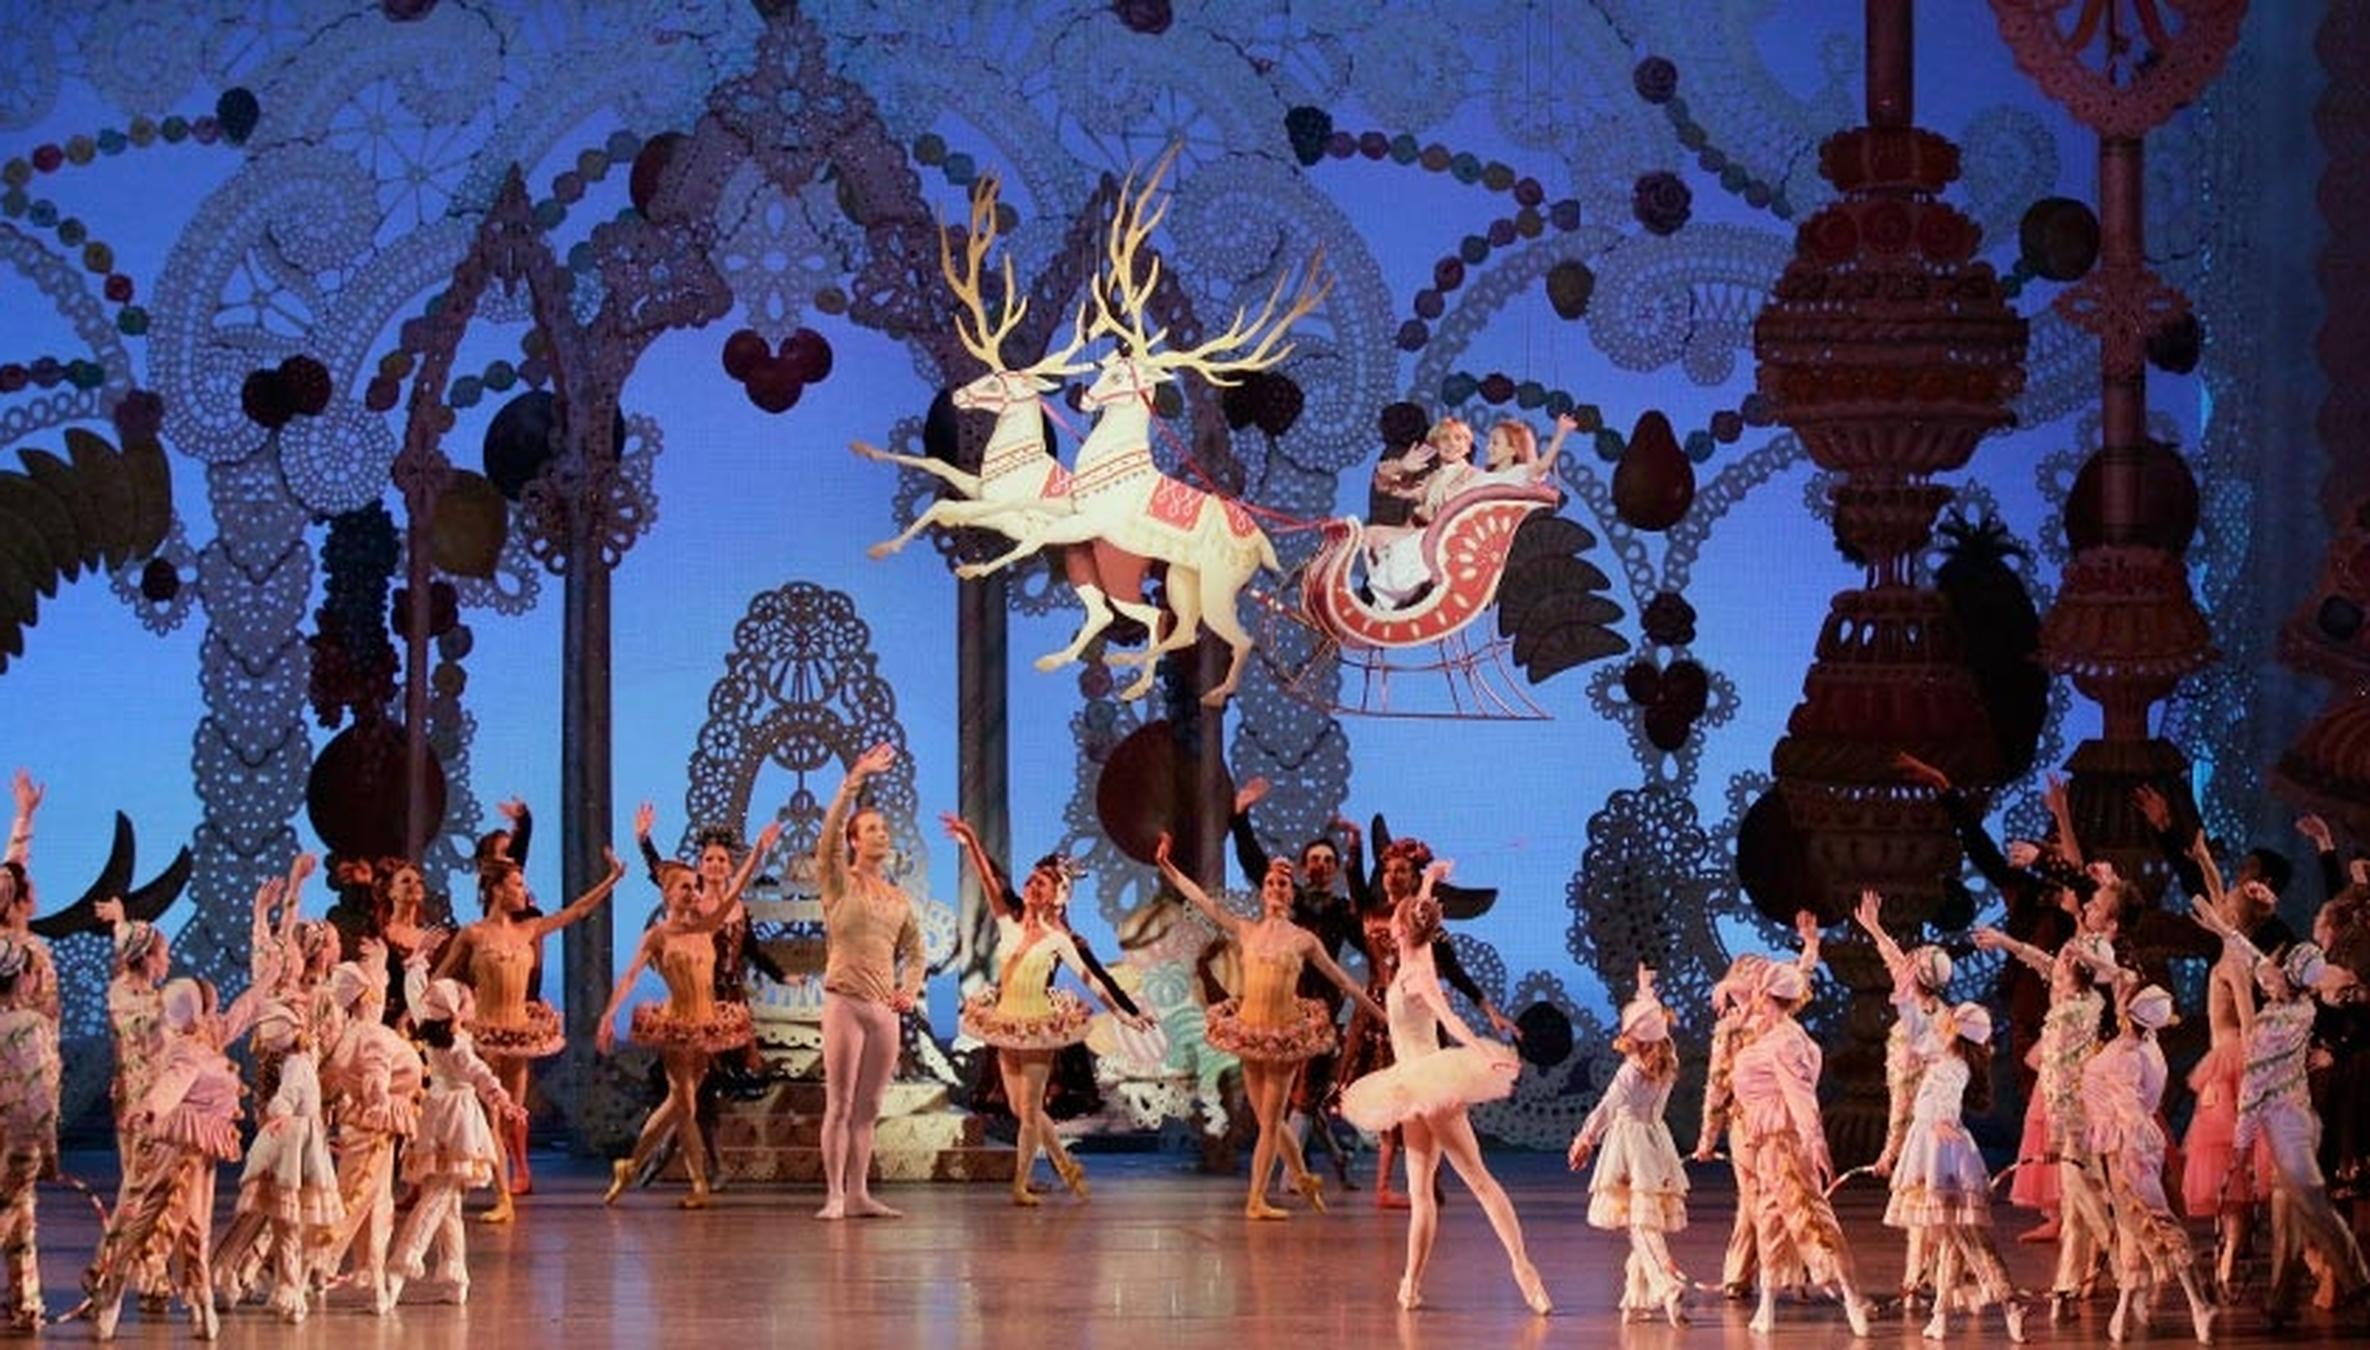 NYC Ballet’s ‘The Nutcracker’ Returns + More NYC Events 11/2411/30